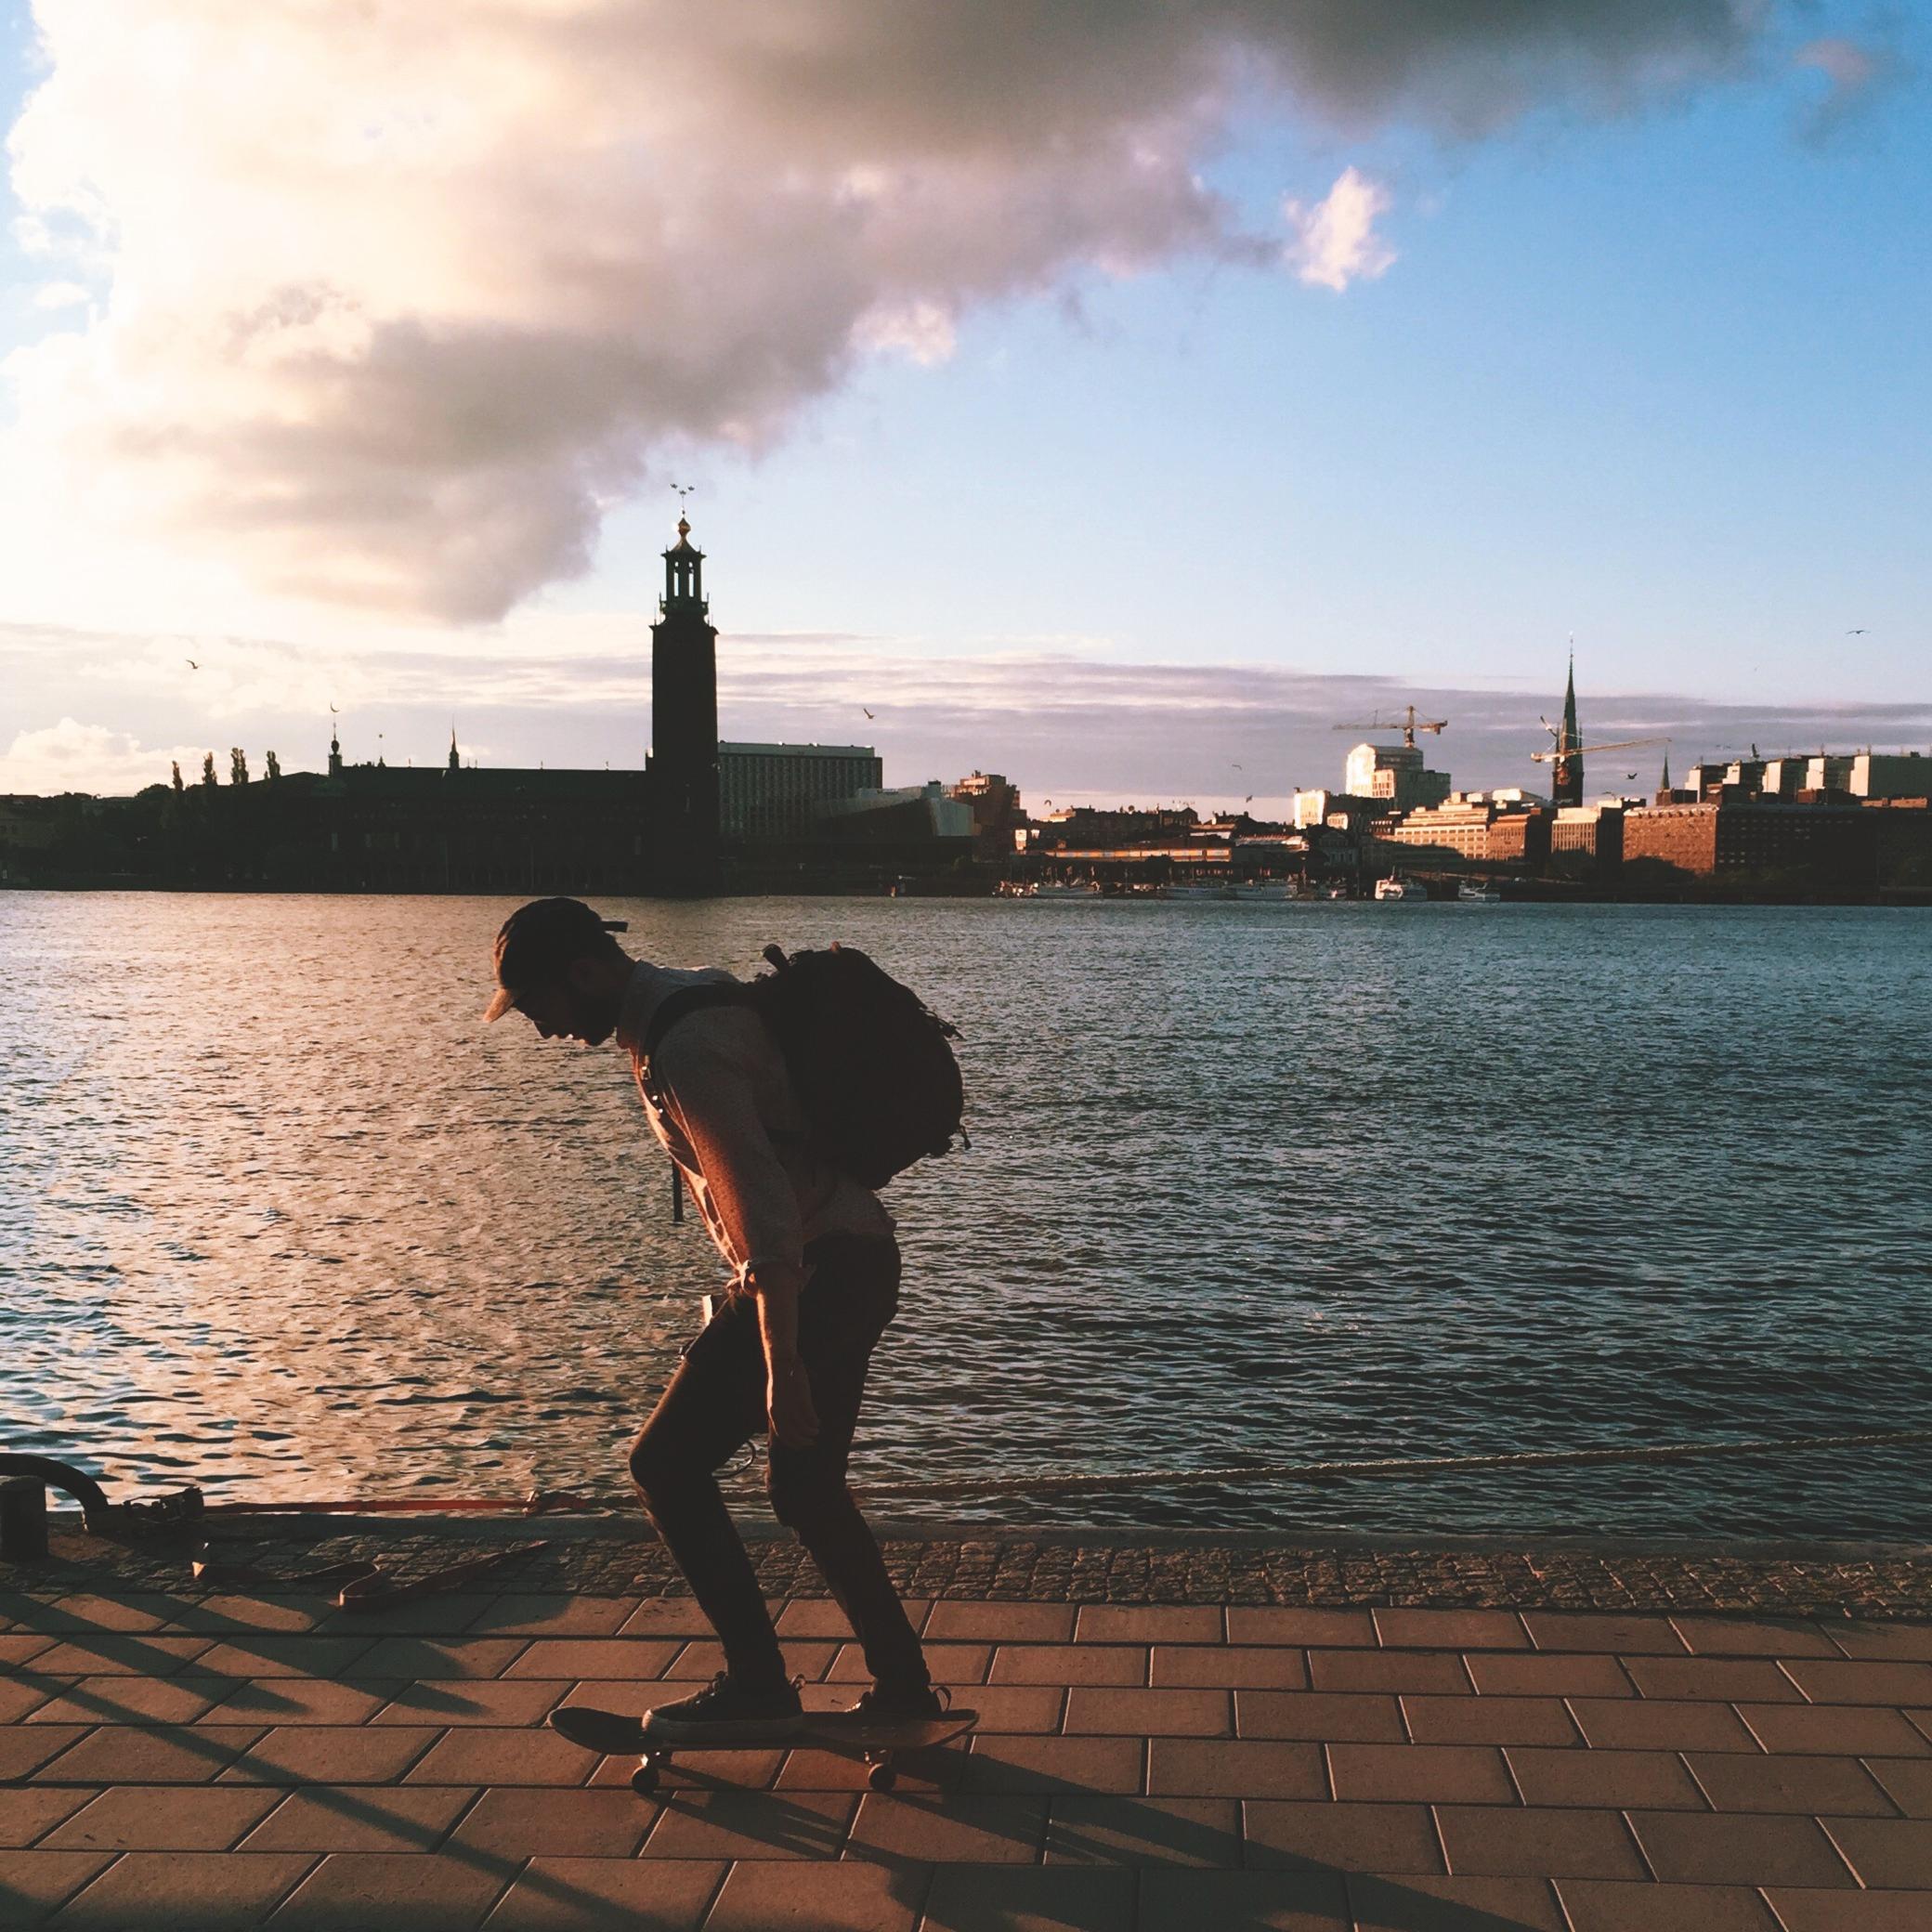 Skateboarder along Stockholm's waterfront, with the City Hall in the background